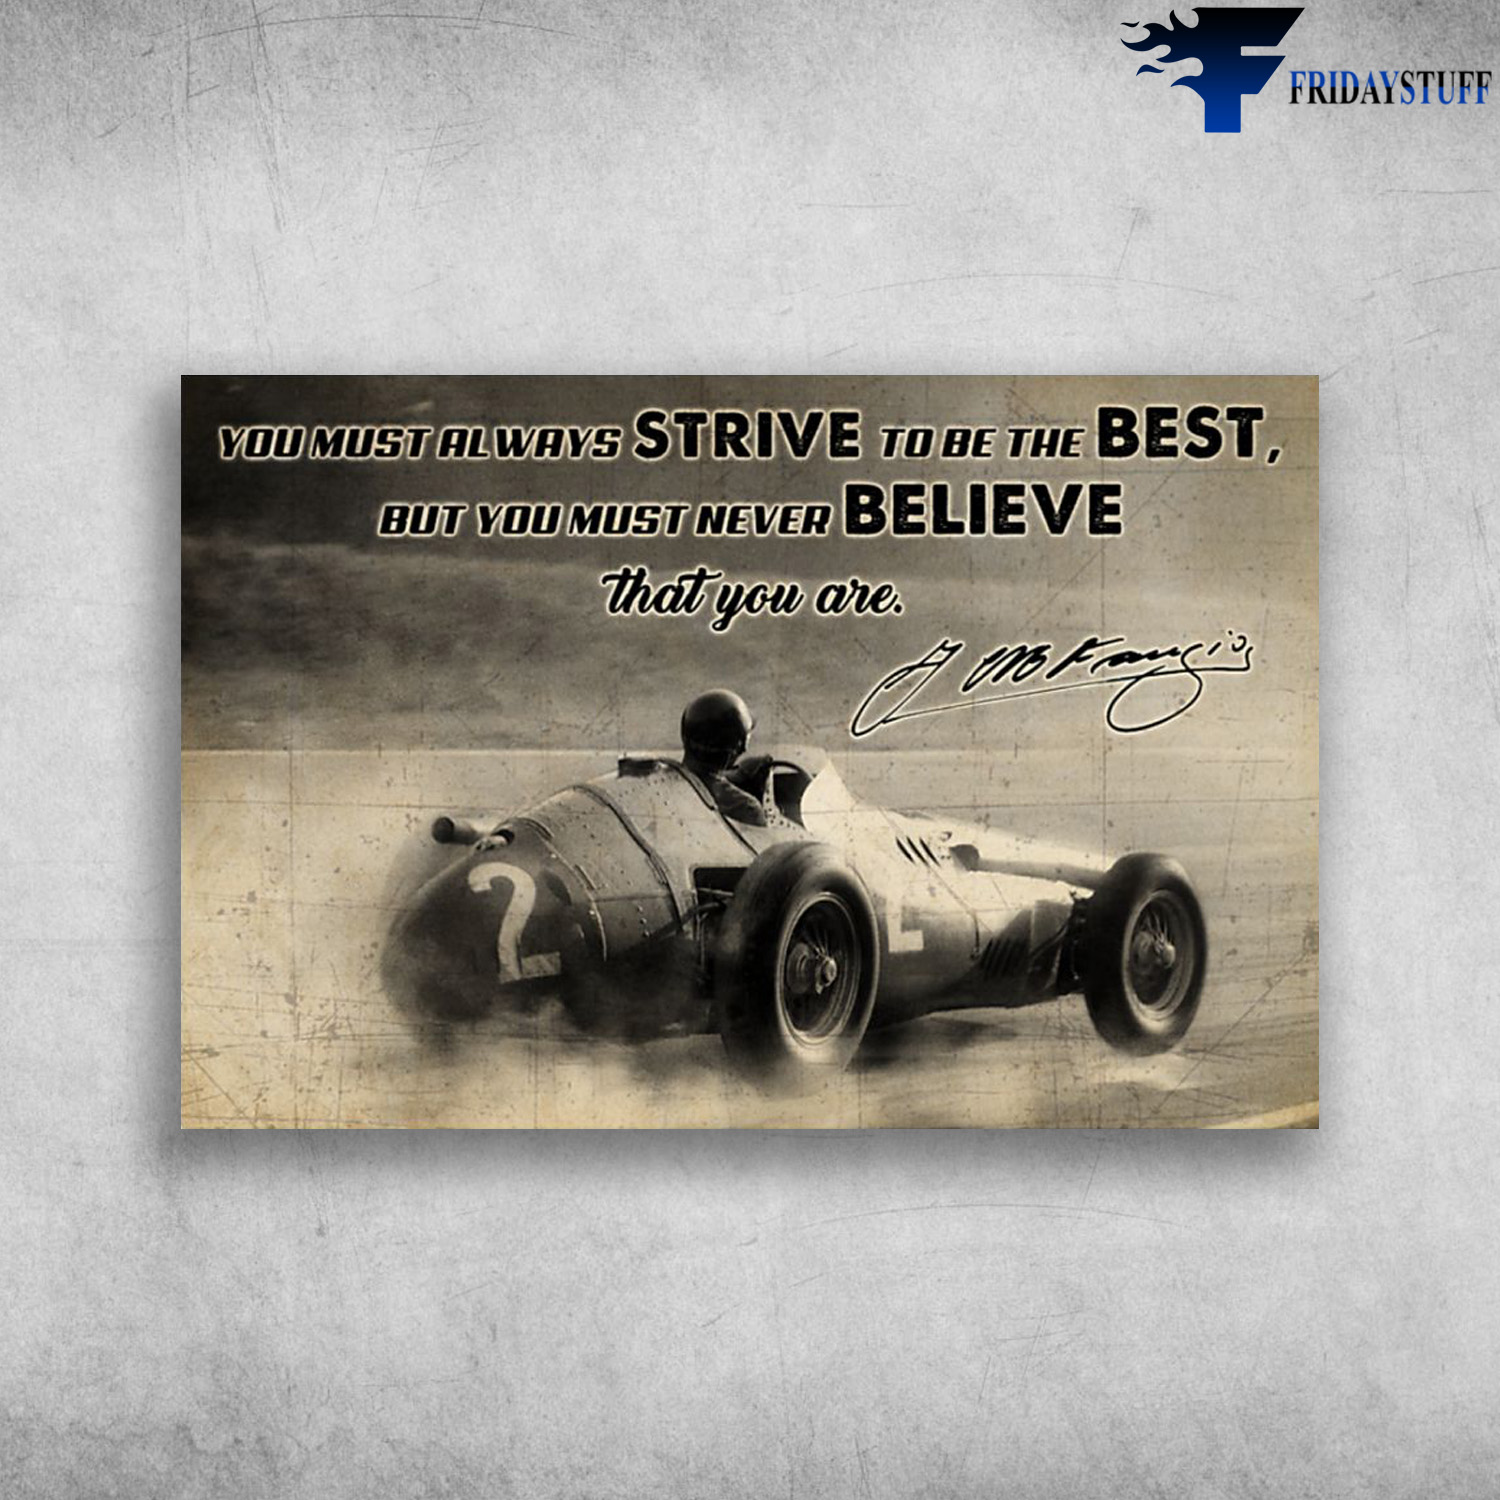 The Rider - You Must Always Strive To Be The Best, But You Must Never Believe That You Are, Juan Manuel Fangio